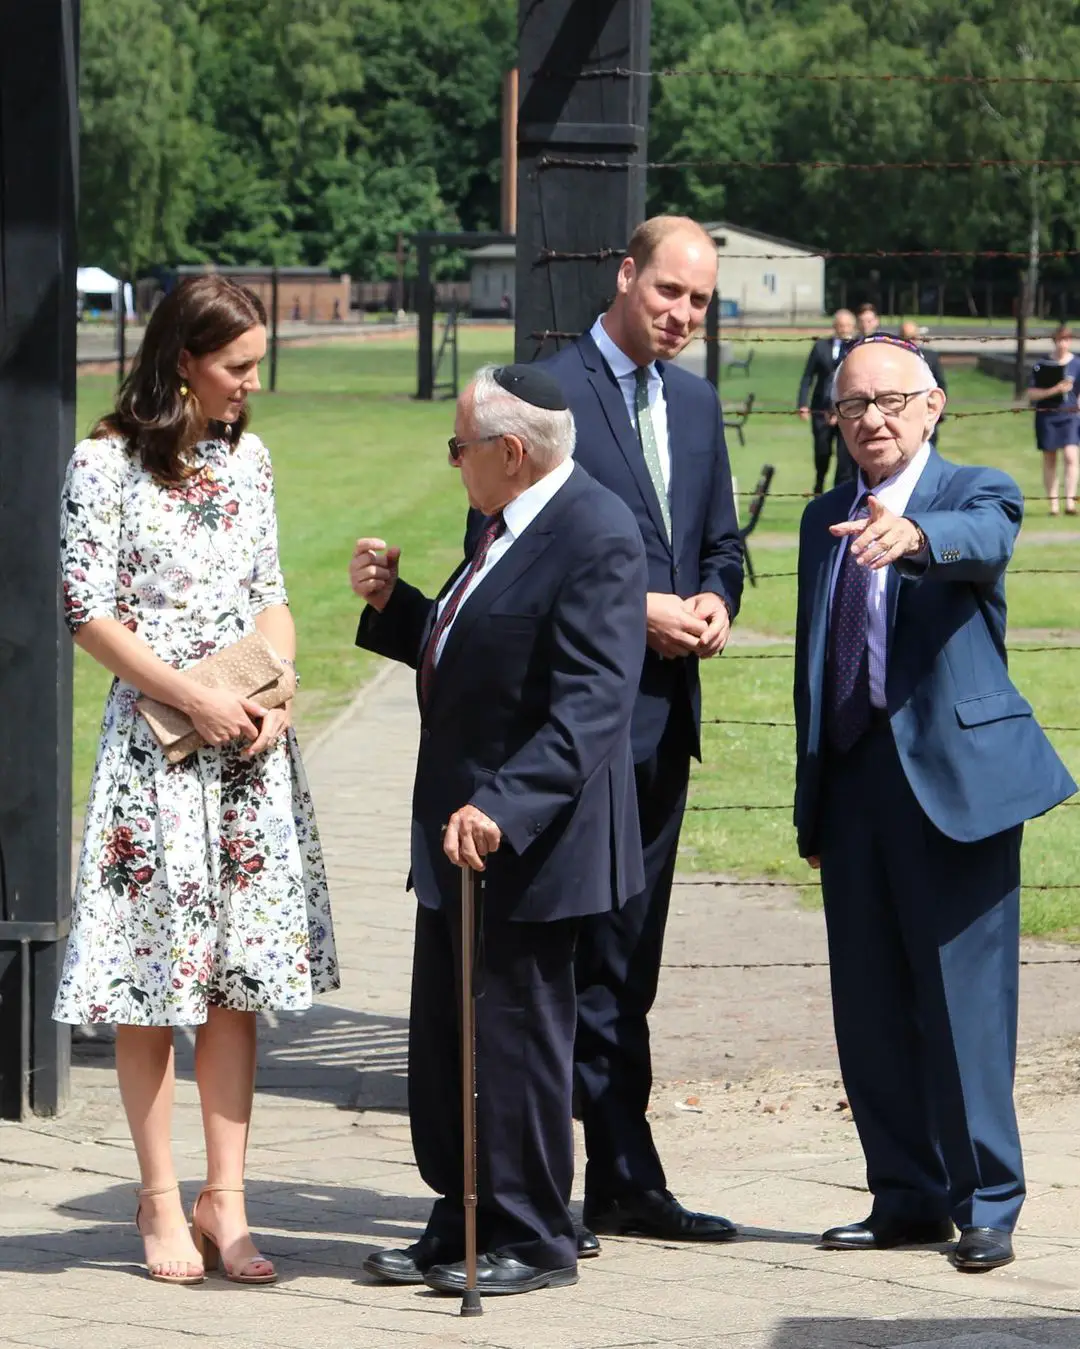 The Duke and Duchess of Cambridge with Holocaust Survivors Zigi Shipper and Manfred Goldberg as teenager in Poland